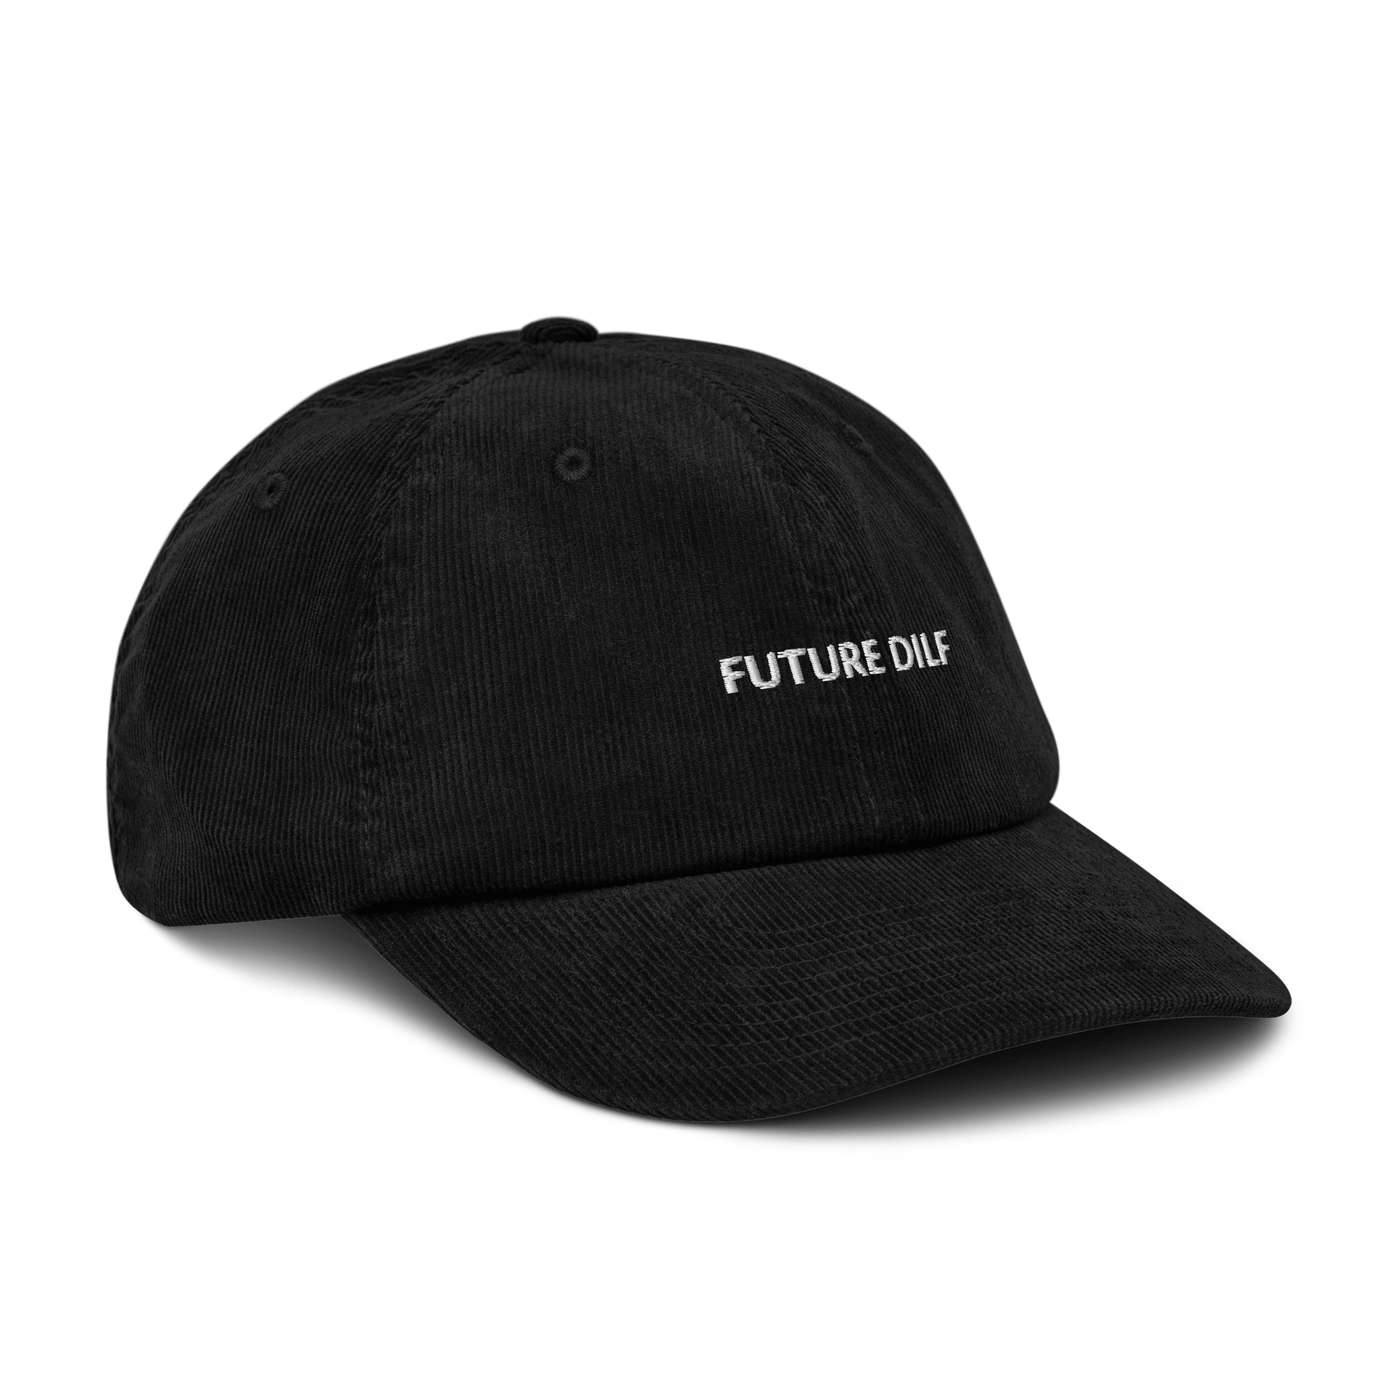 Future Dilf Corduroy Hat - Black - - Just Another Cap Store